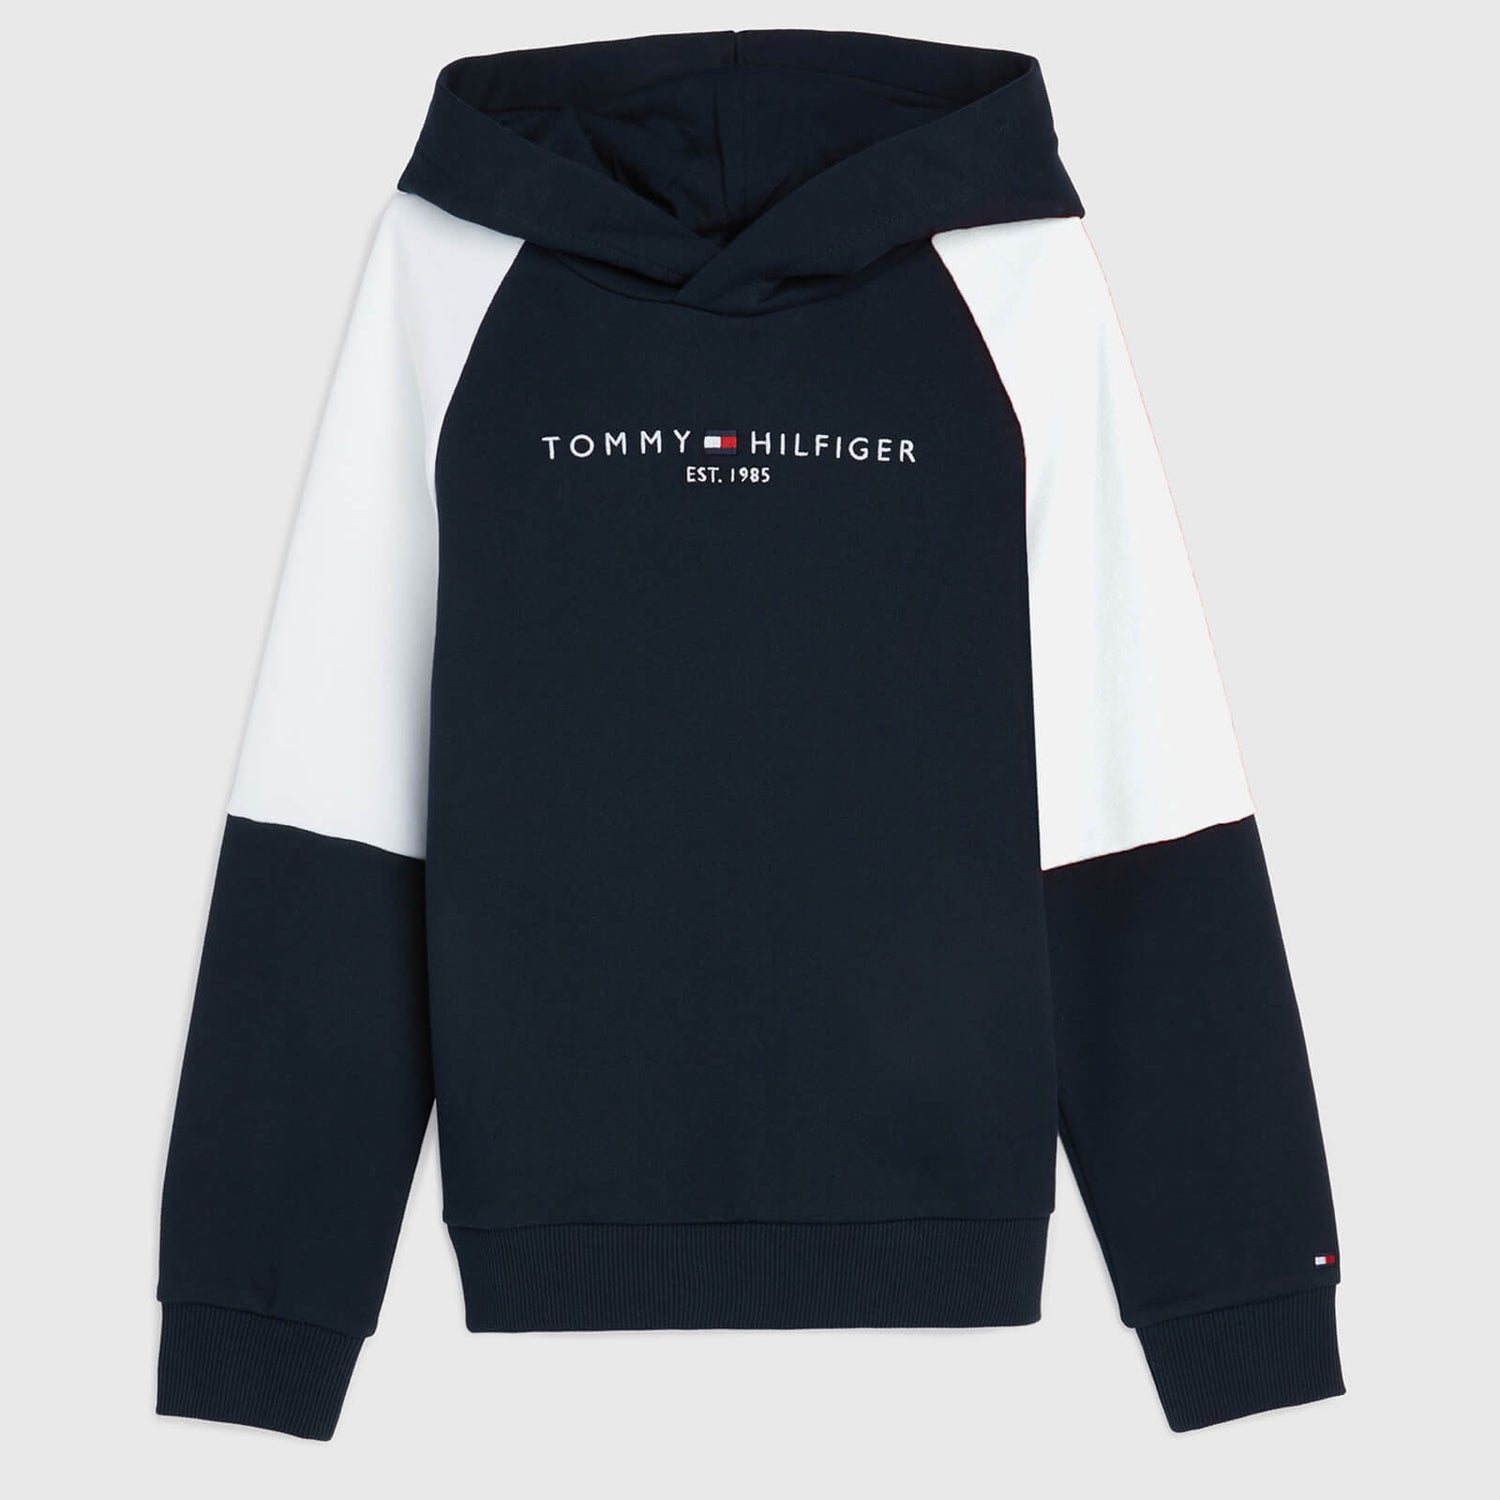 Tommy Hilfiger Boys’ Essential Cotton-Jersey Hoodie and Jogging Bottoms Set